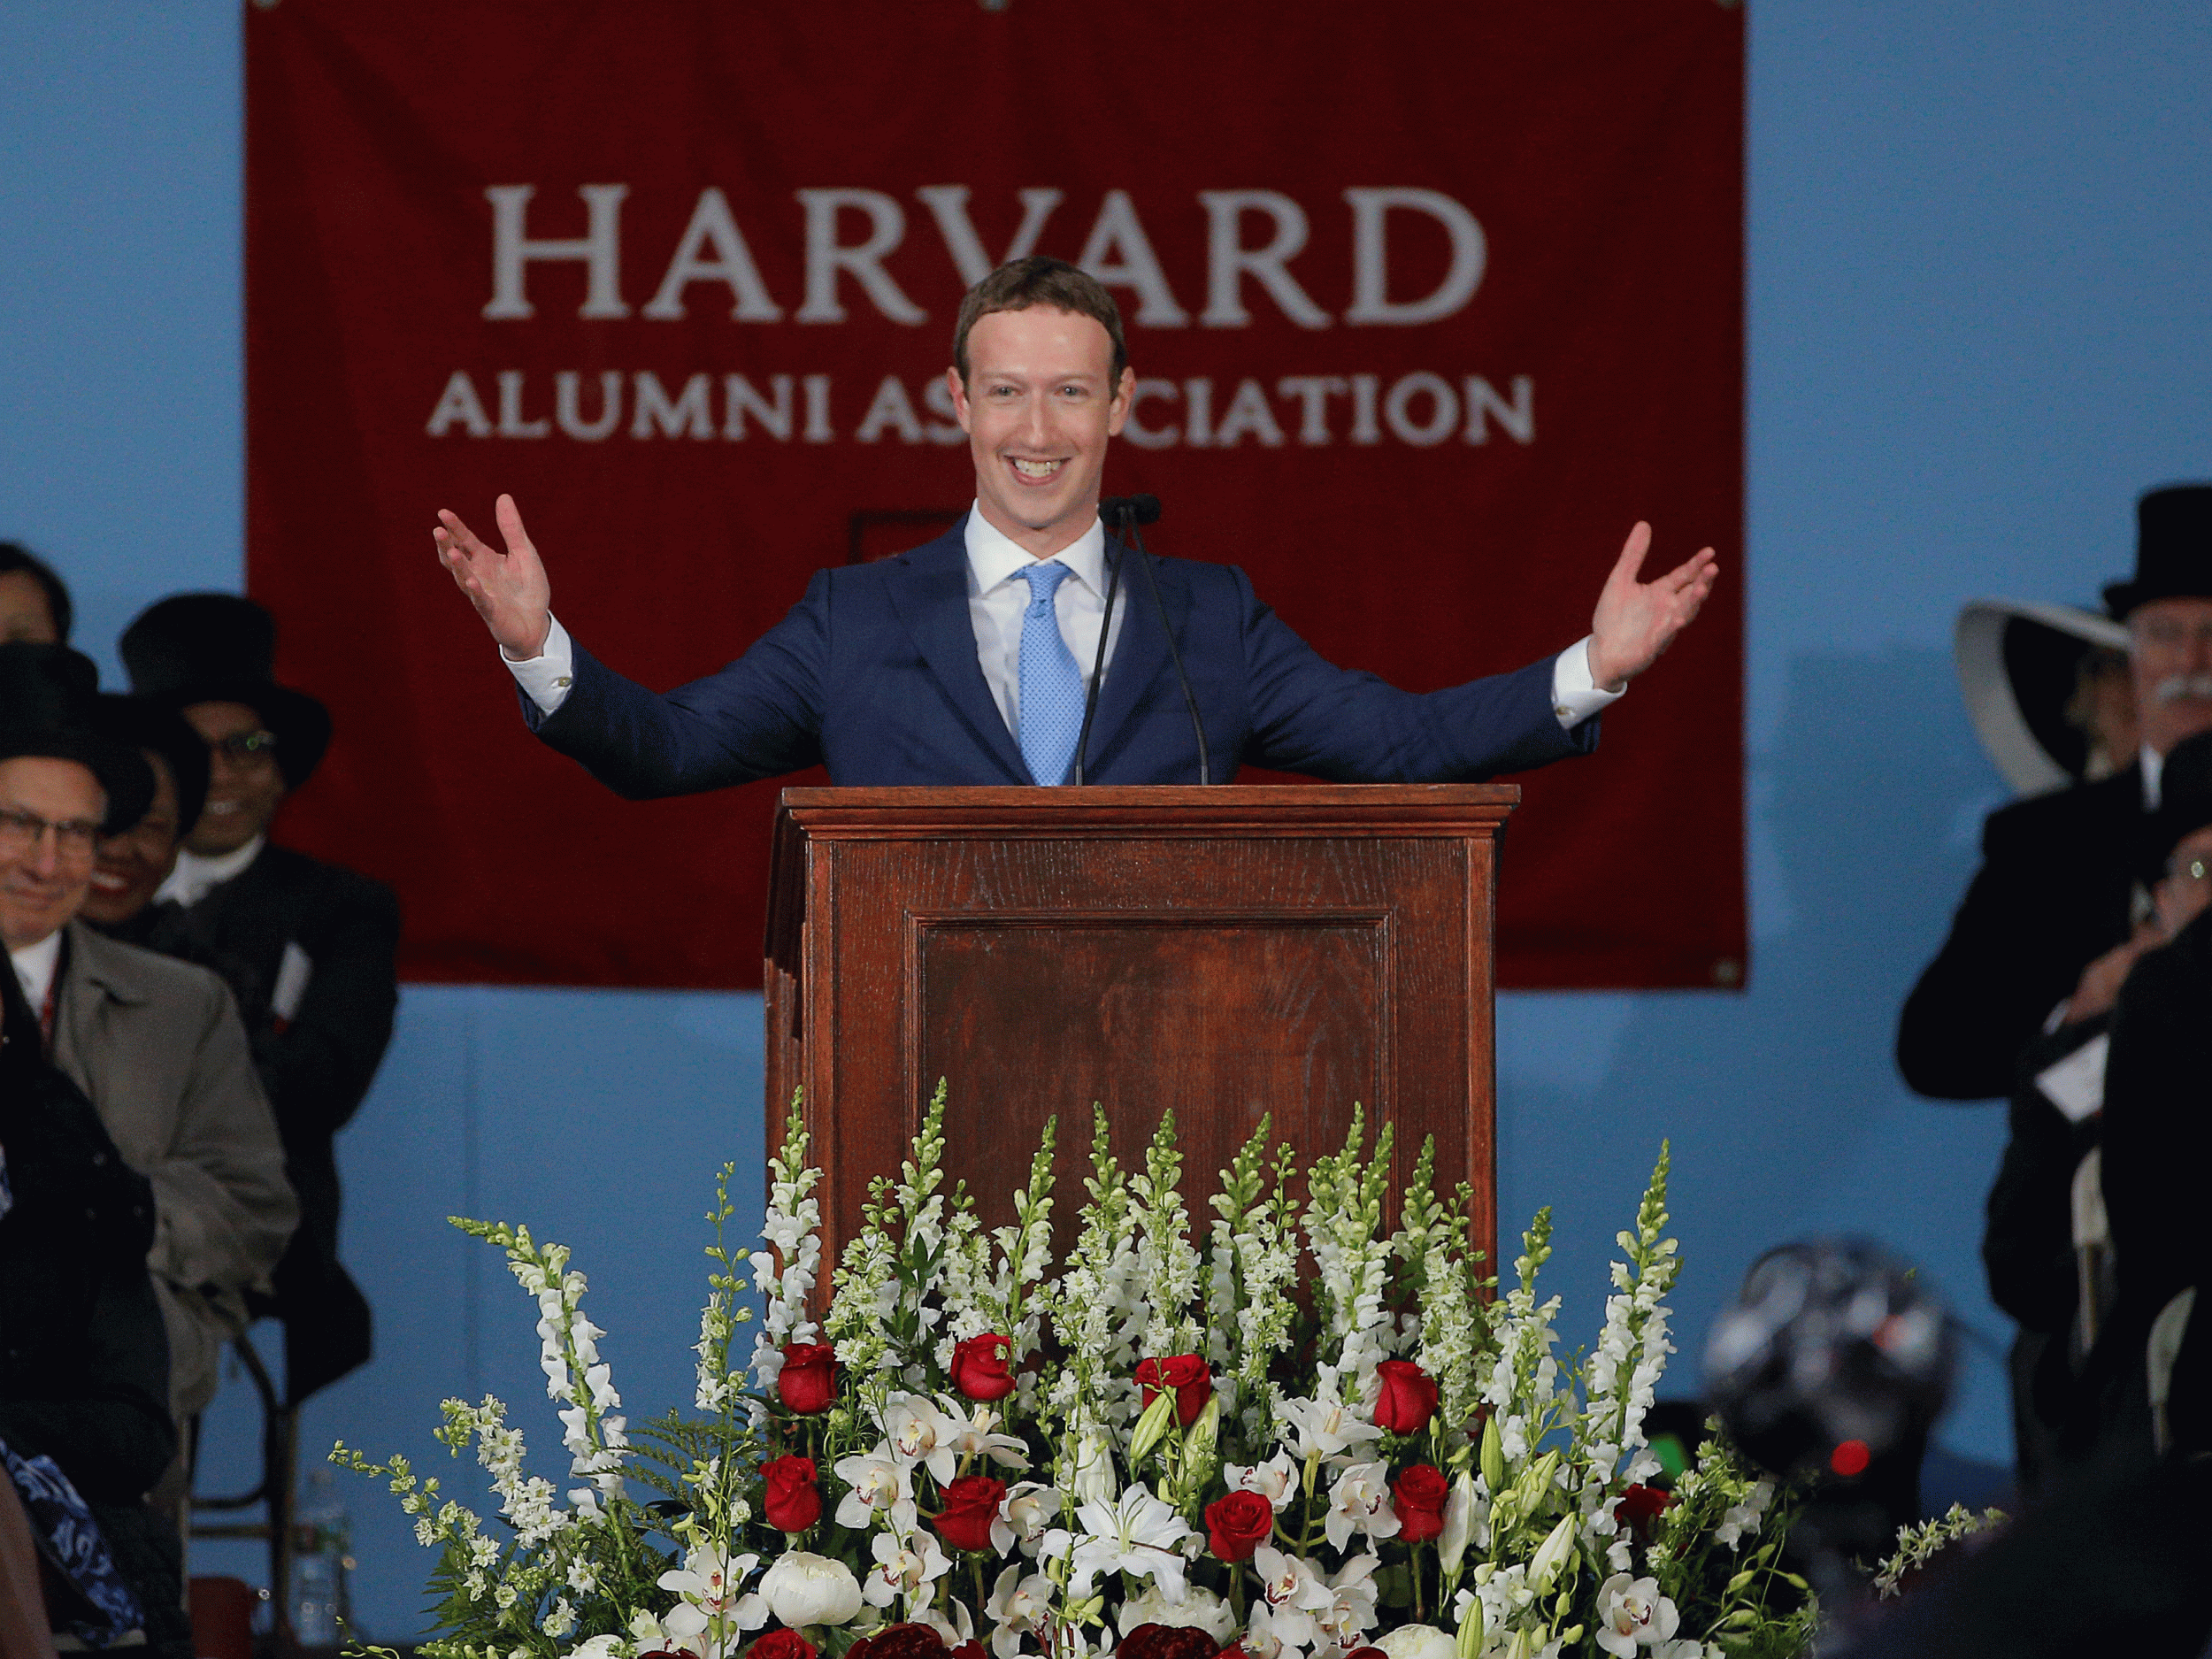 'If I get through this speech, it’ll be the first time I actually finish something at Harvard'